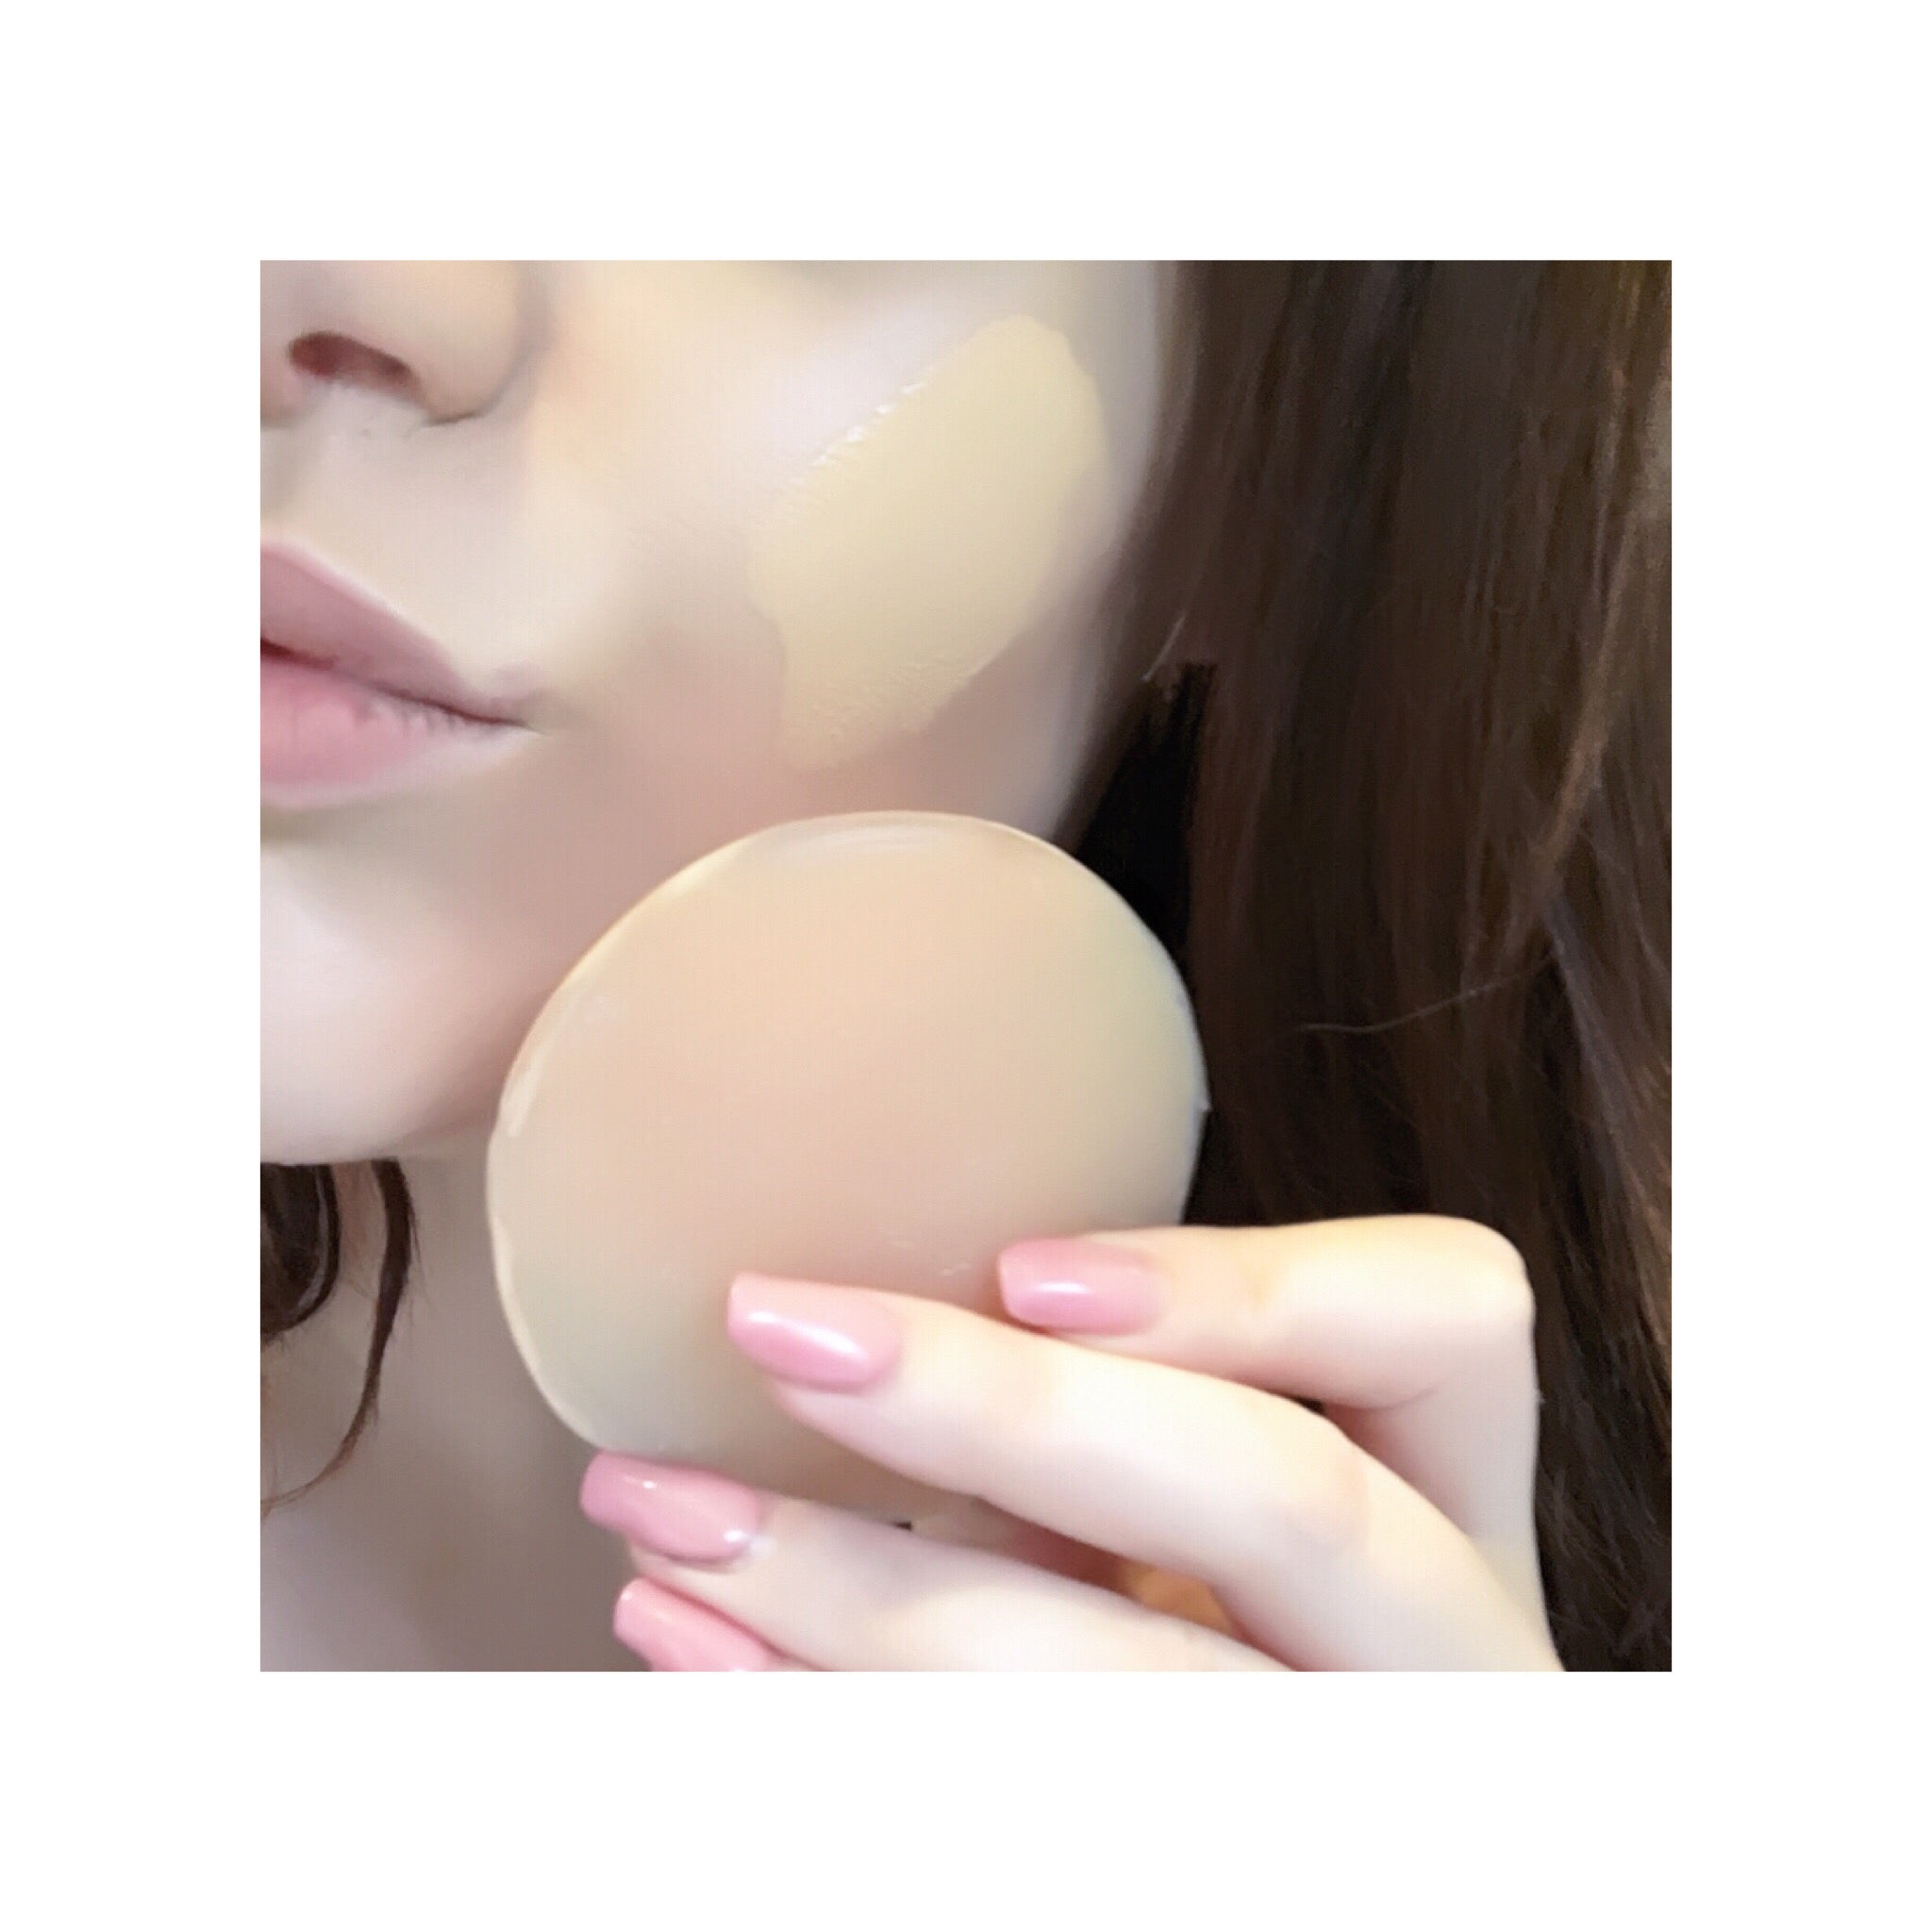 Silicone Nipple cover make up applicator! YAY or NAY?